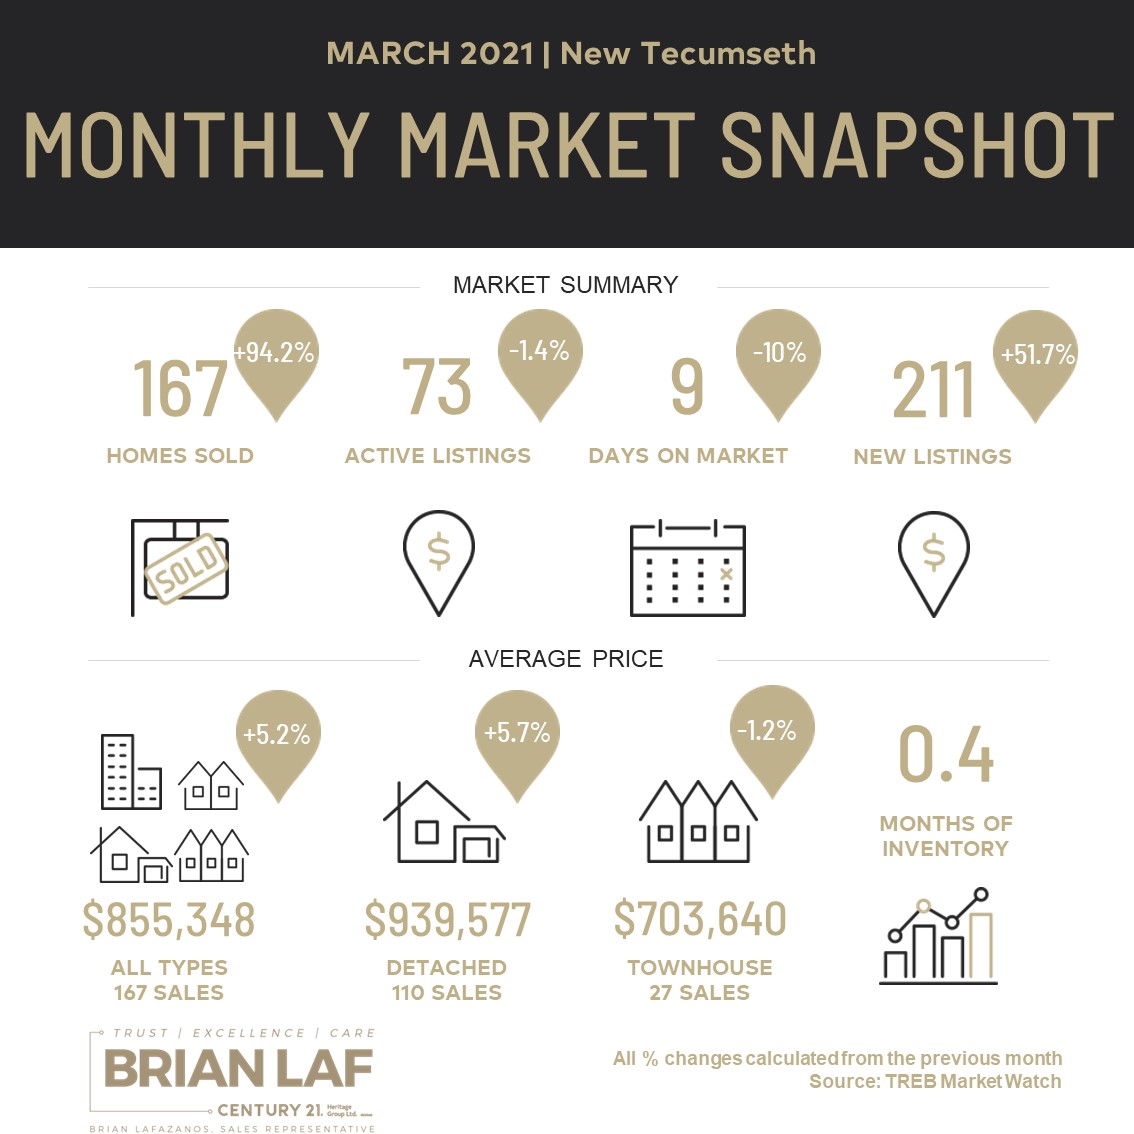 New Tecumseth Monthly Market Update - March, 2021